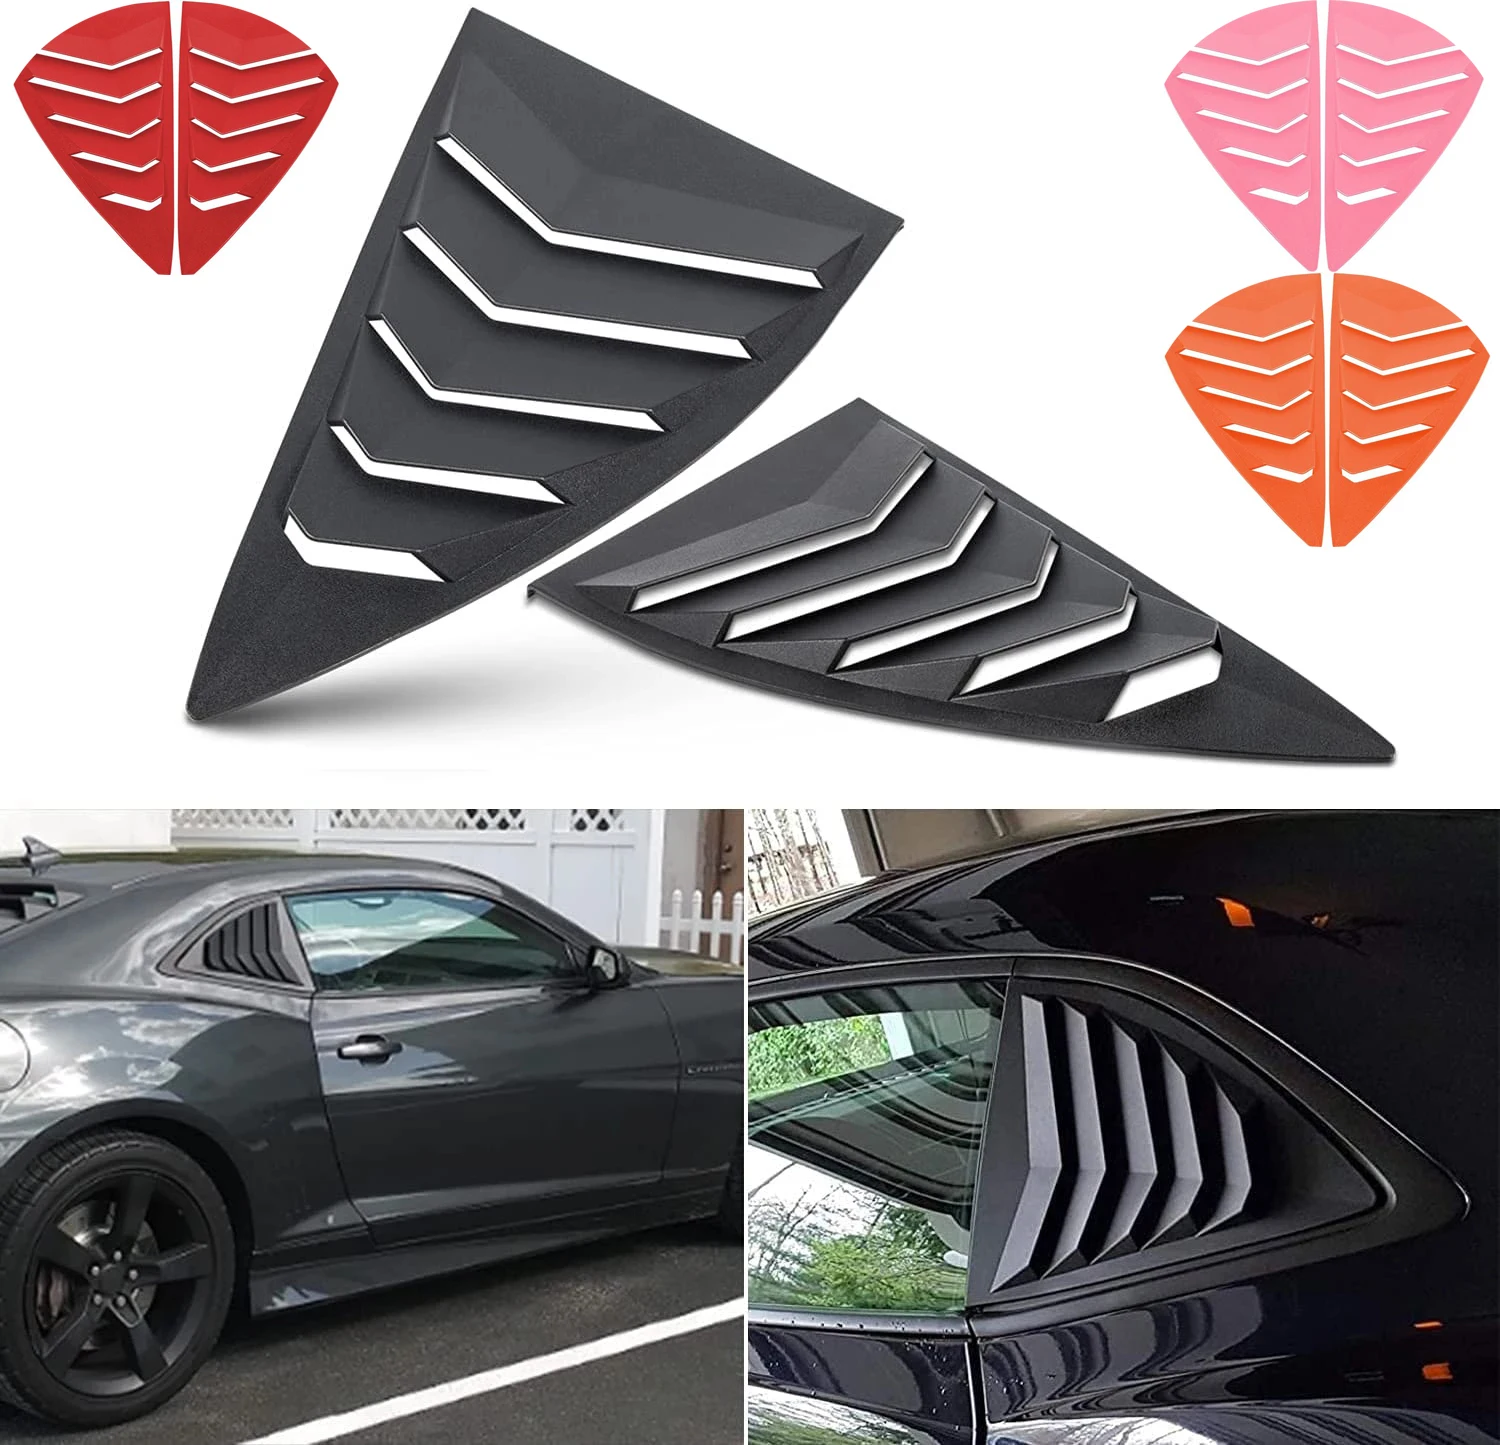 Rear Side Window Louvers Cover Fit For Chevy Chevrolet Camaro 2010-2015 ABS Window Visor Sun Shade Cover Vent Lambo Style